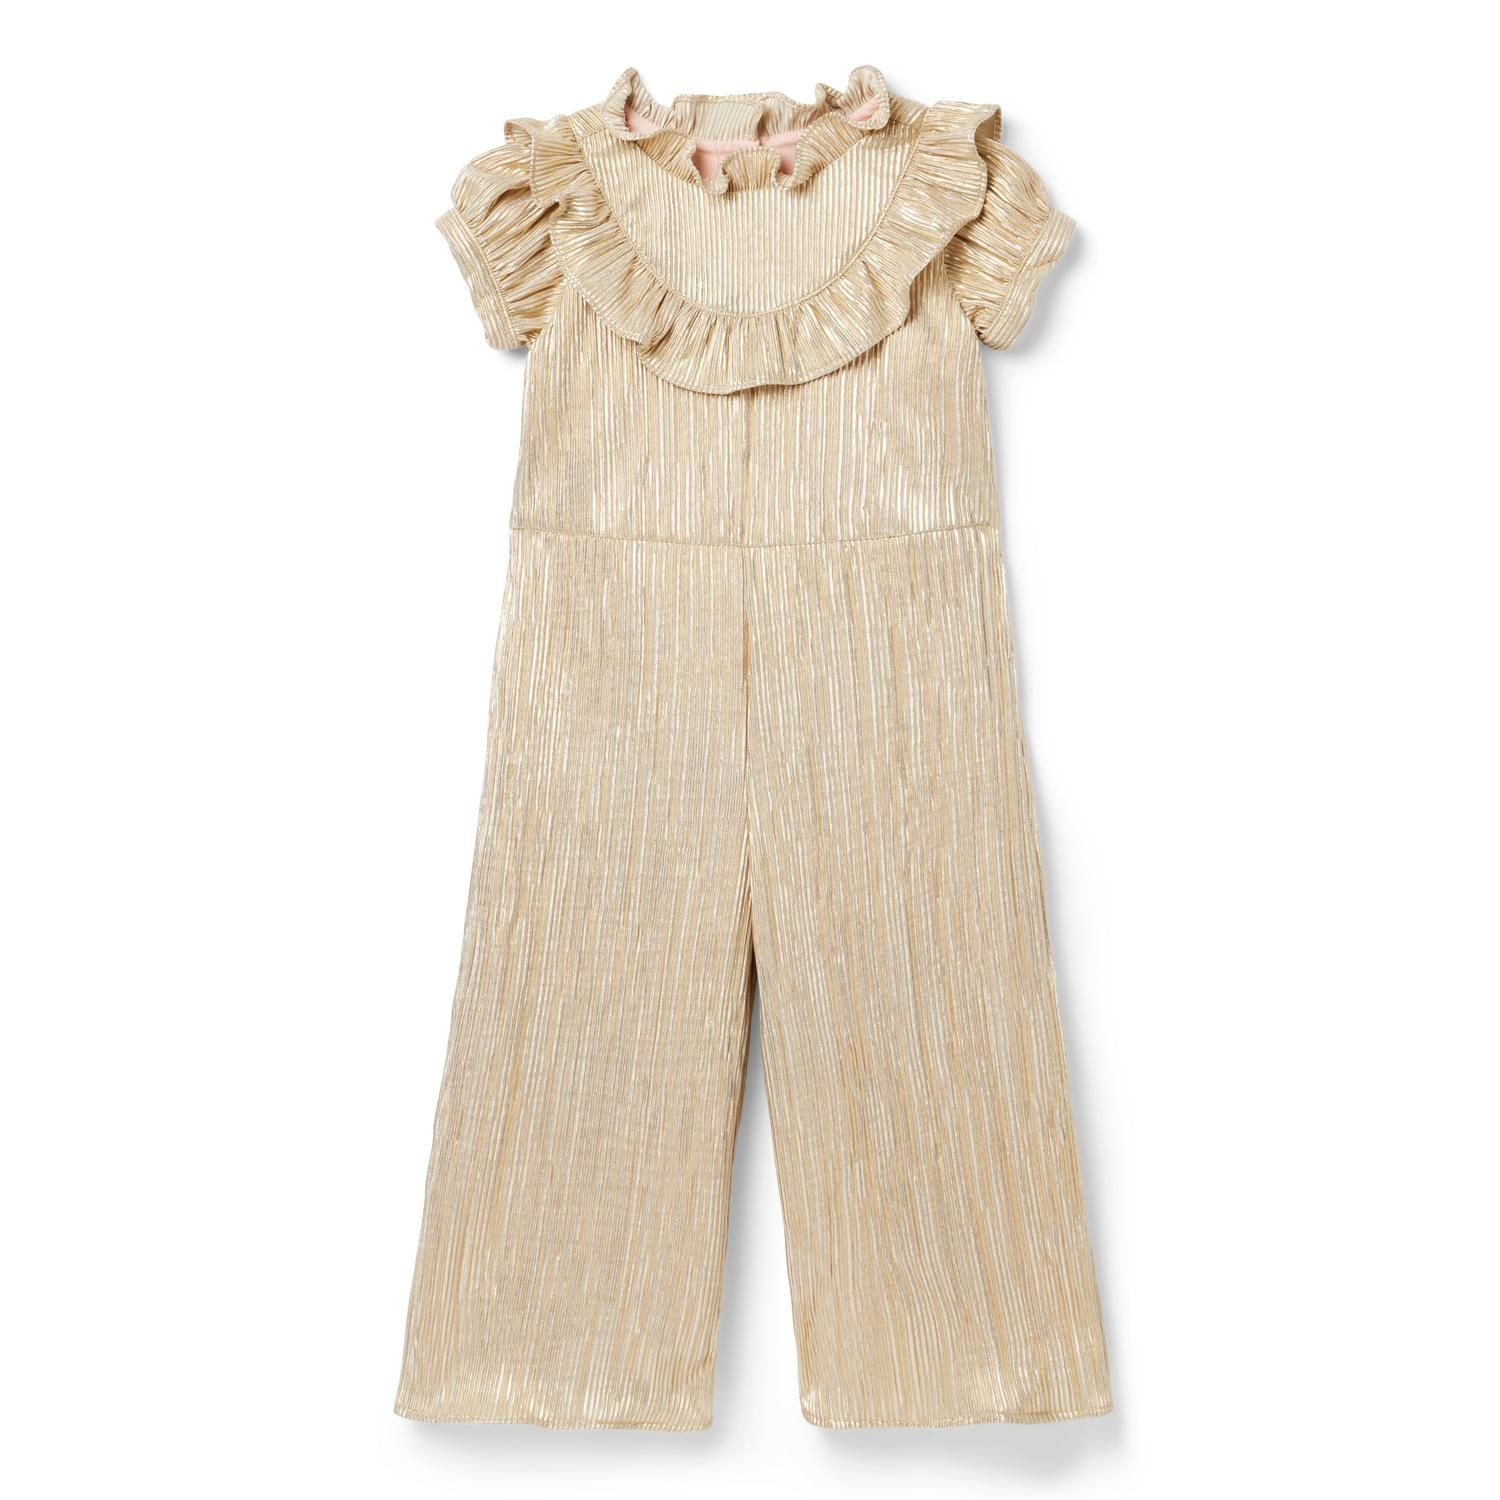 The Twinkle and Shine Jumpsuit | Janie and Jack